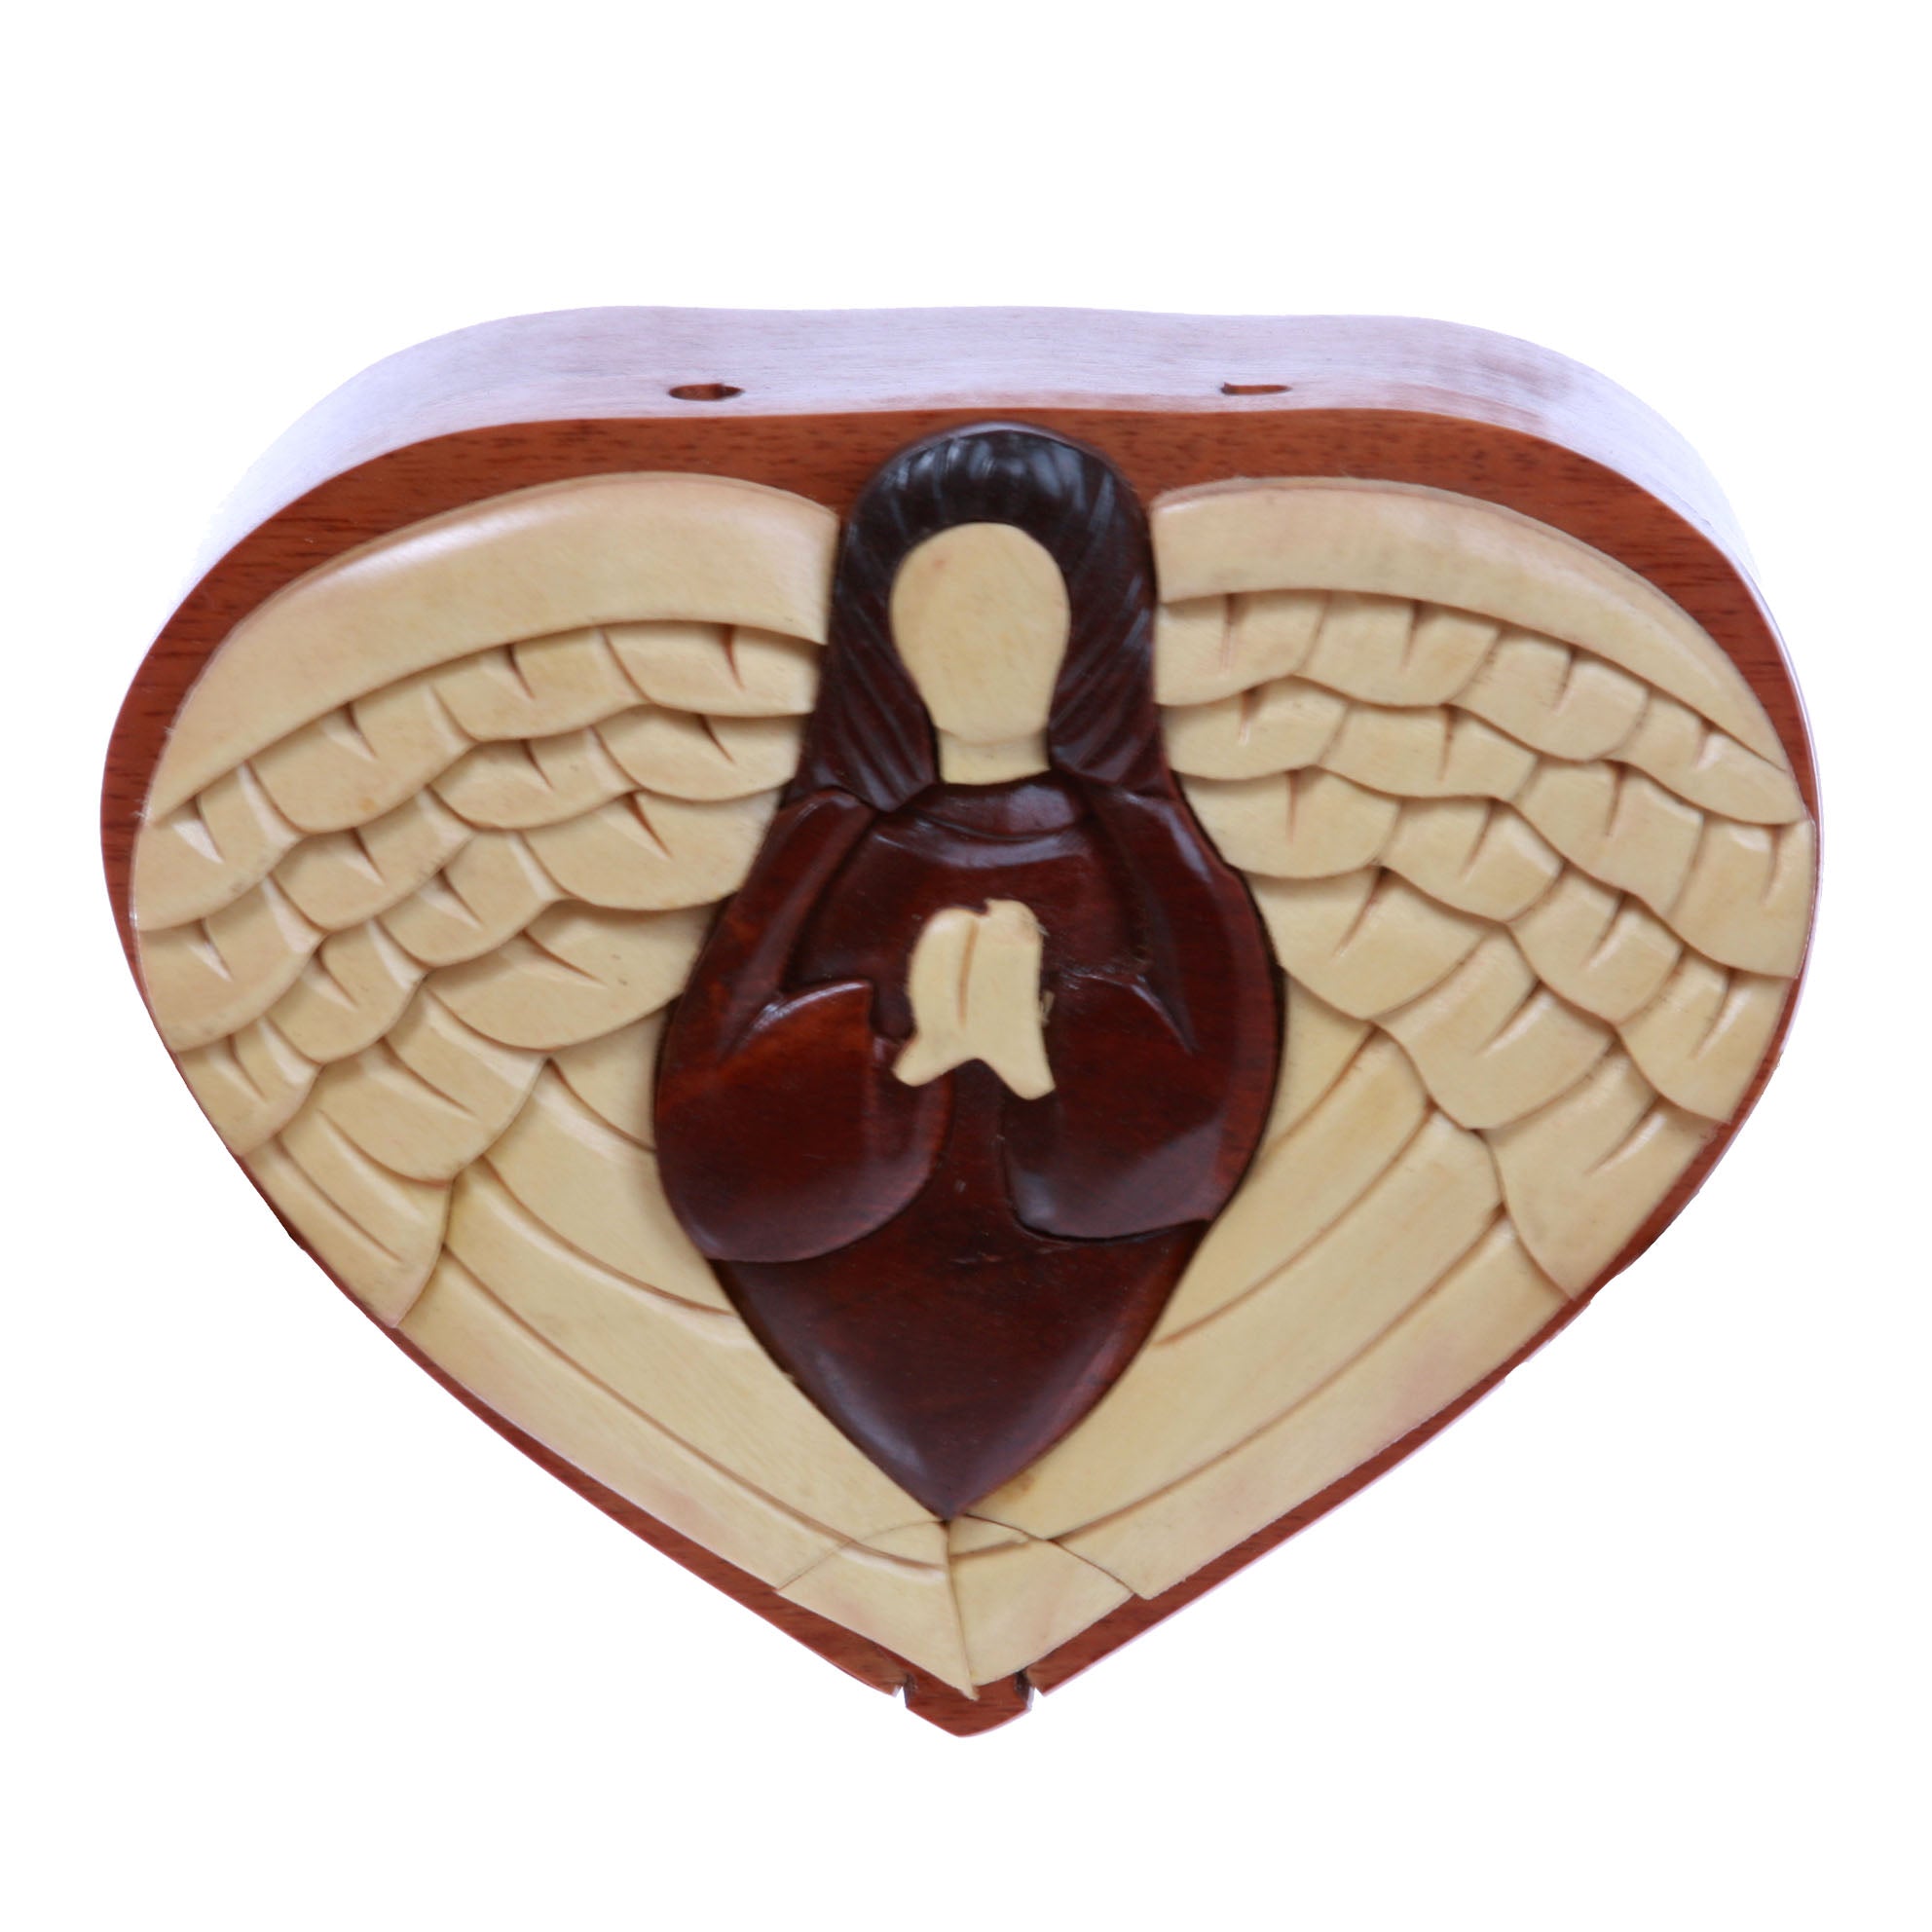 Virgin Mary With Wings Handcrafted Wooden Heart Shape Secret Jewelry Puzzle Box